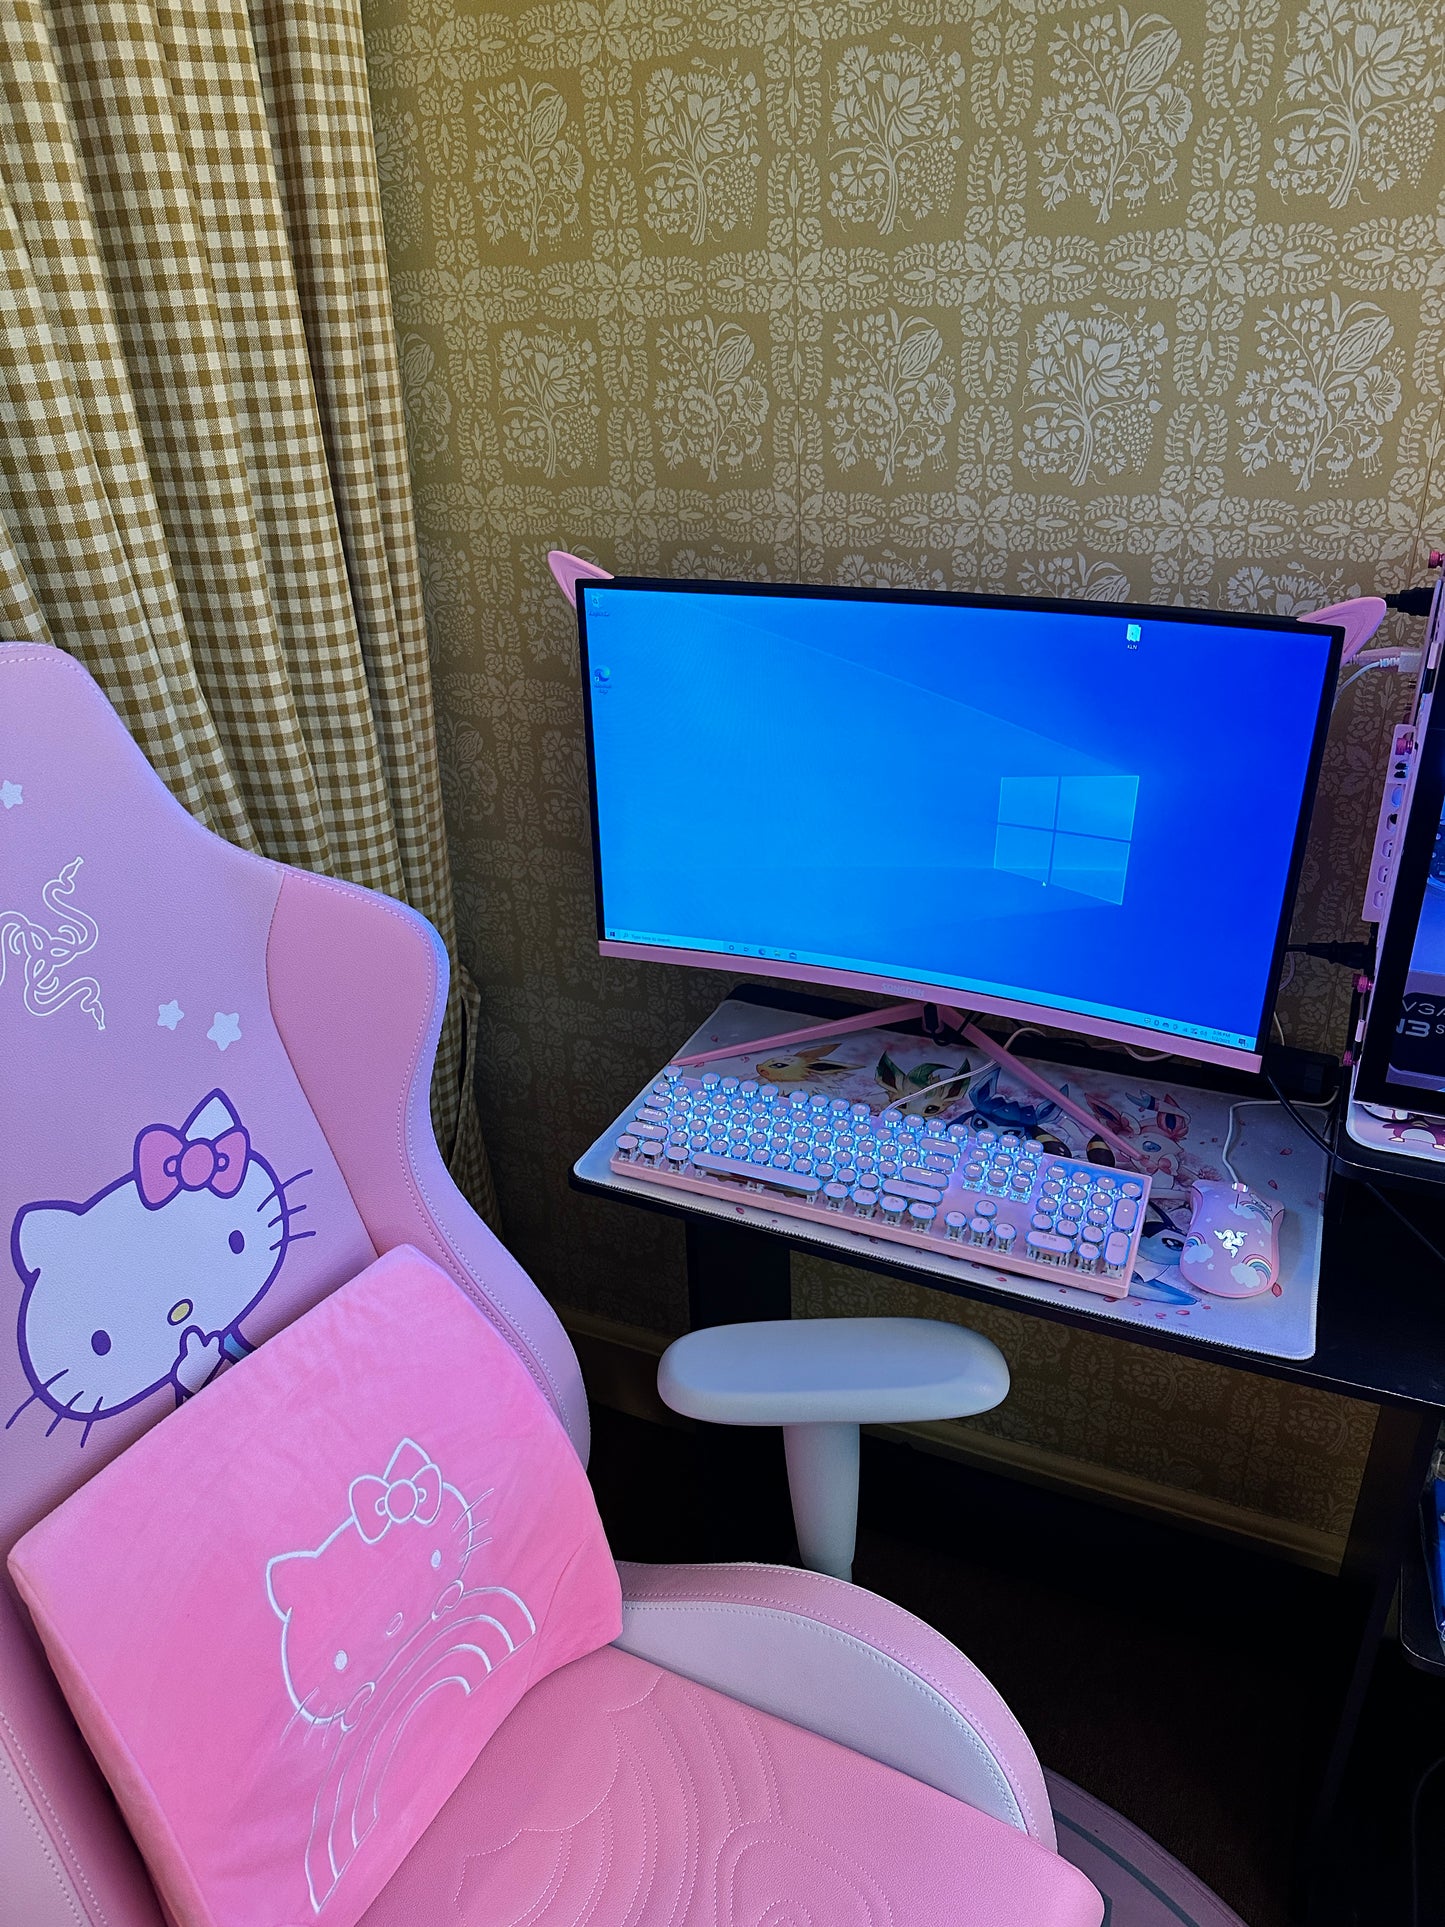 PRE ORDER - PINK GAMING MONITOR WITH OPTIONAL CAT EARS - PRE ORDER